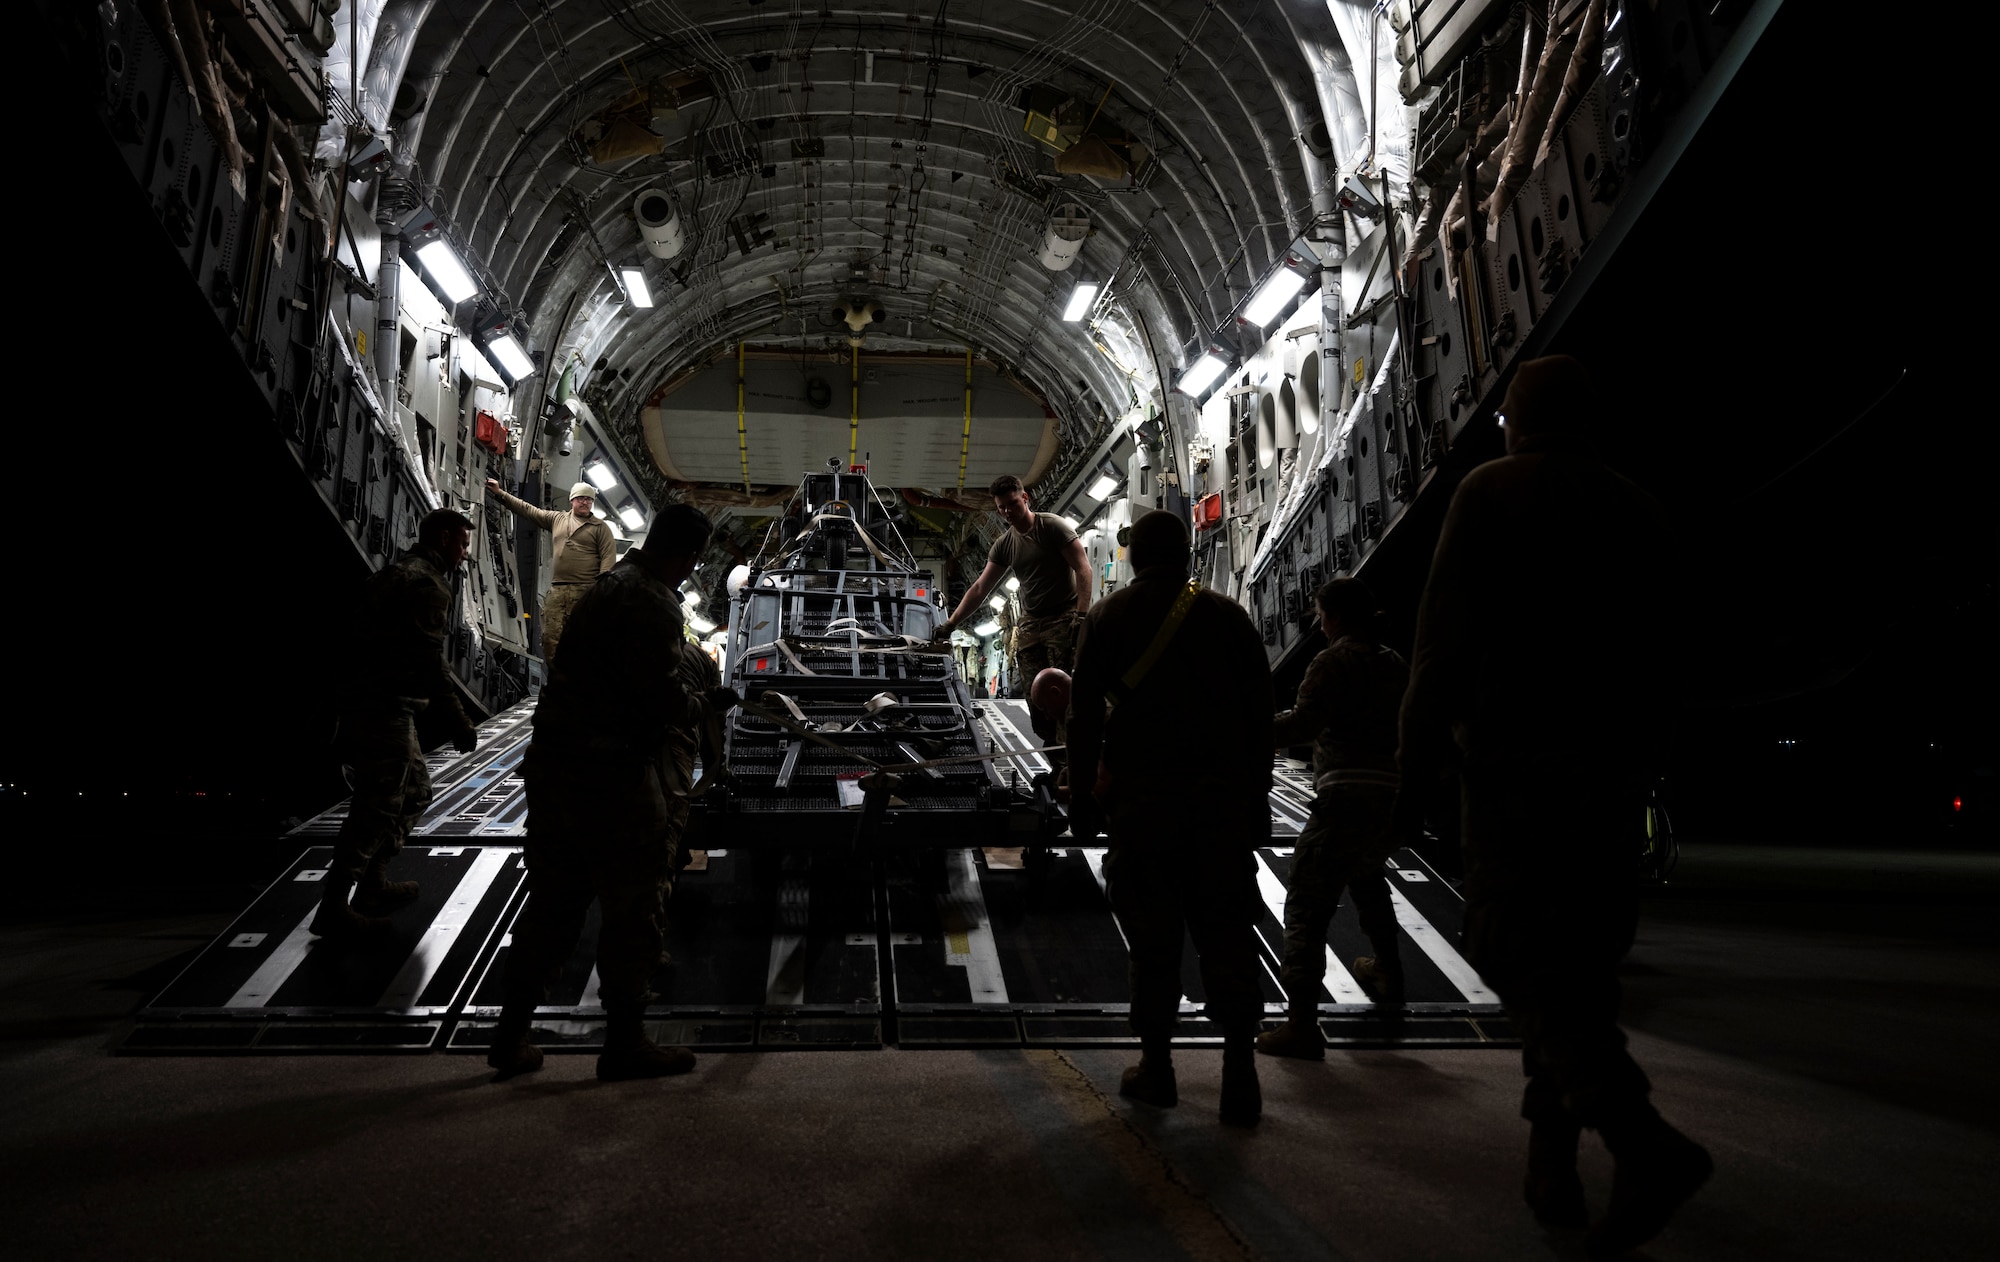 U.S. Airmen, assigned to the 28th Bomb Wing and the 15th Wing, load cargo onto a C-17  Globemaster III at Ellsworth Air Force Base, South Dakota during a partner integration mission in support of Exercise COPE INDIA 23, April 6, 2023. U.S. Indo-Pacific Command is committed to a free and open Indo-Pacific. (U.S. Air Force Photo by Airman 1st Class Yendi Borjas)